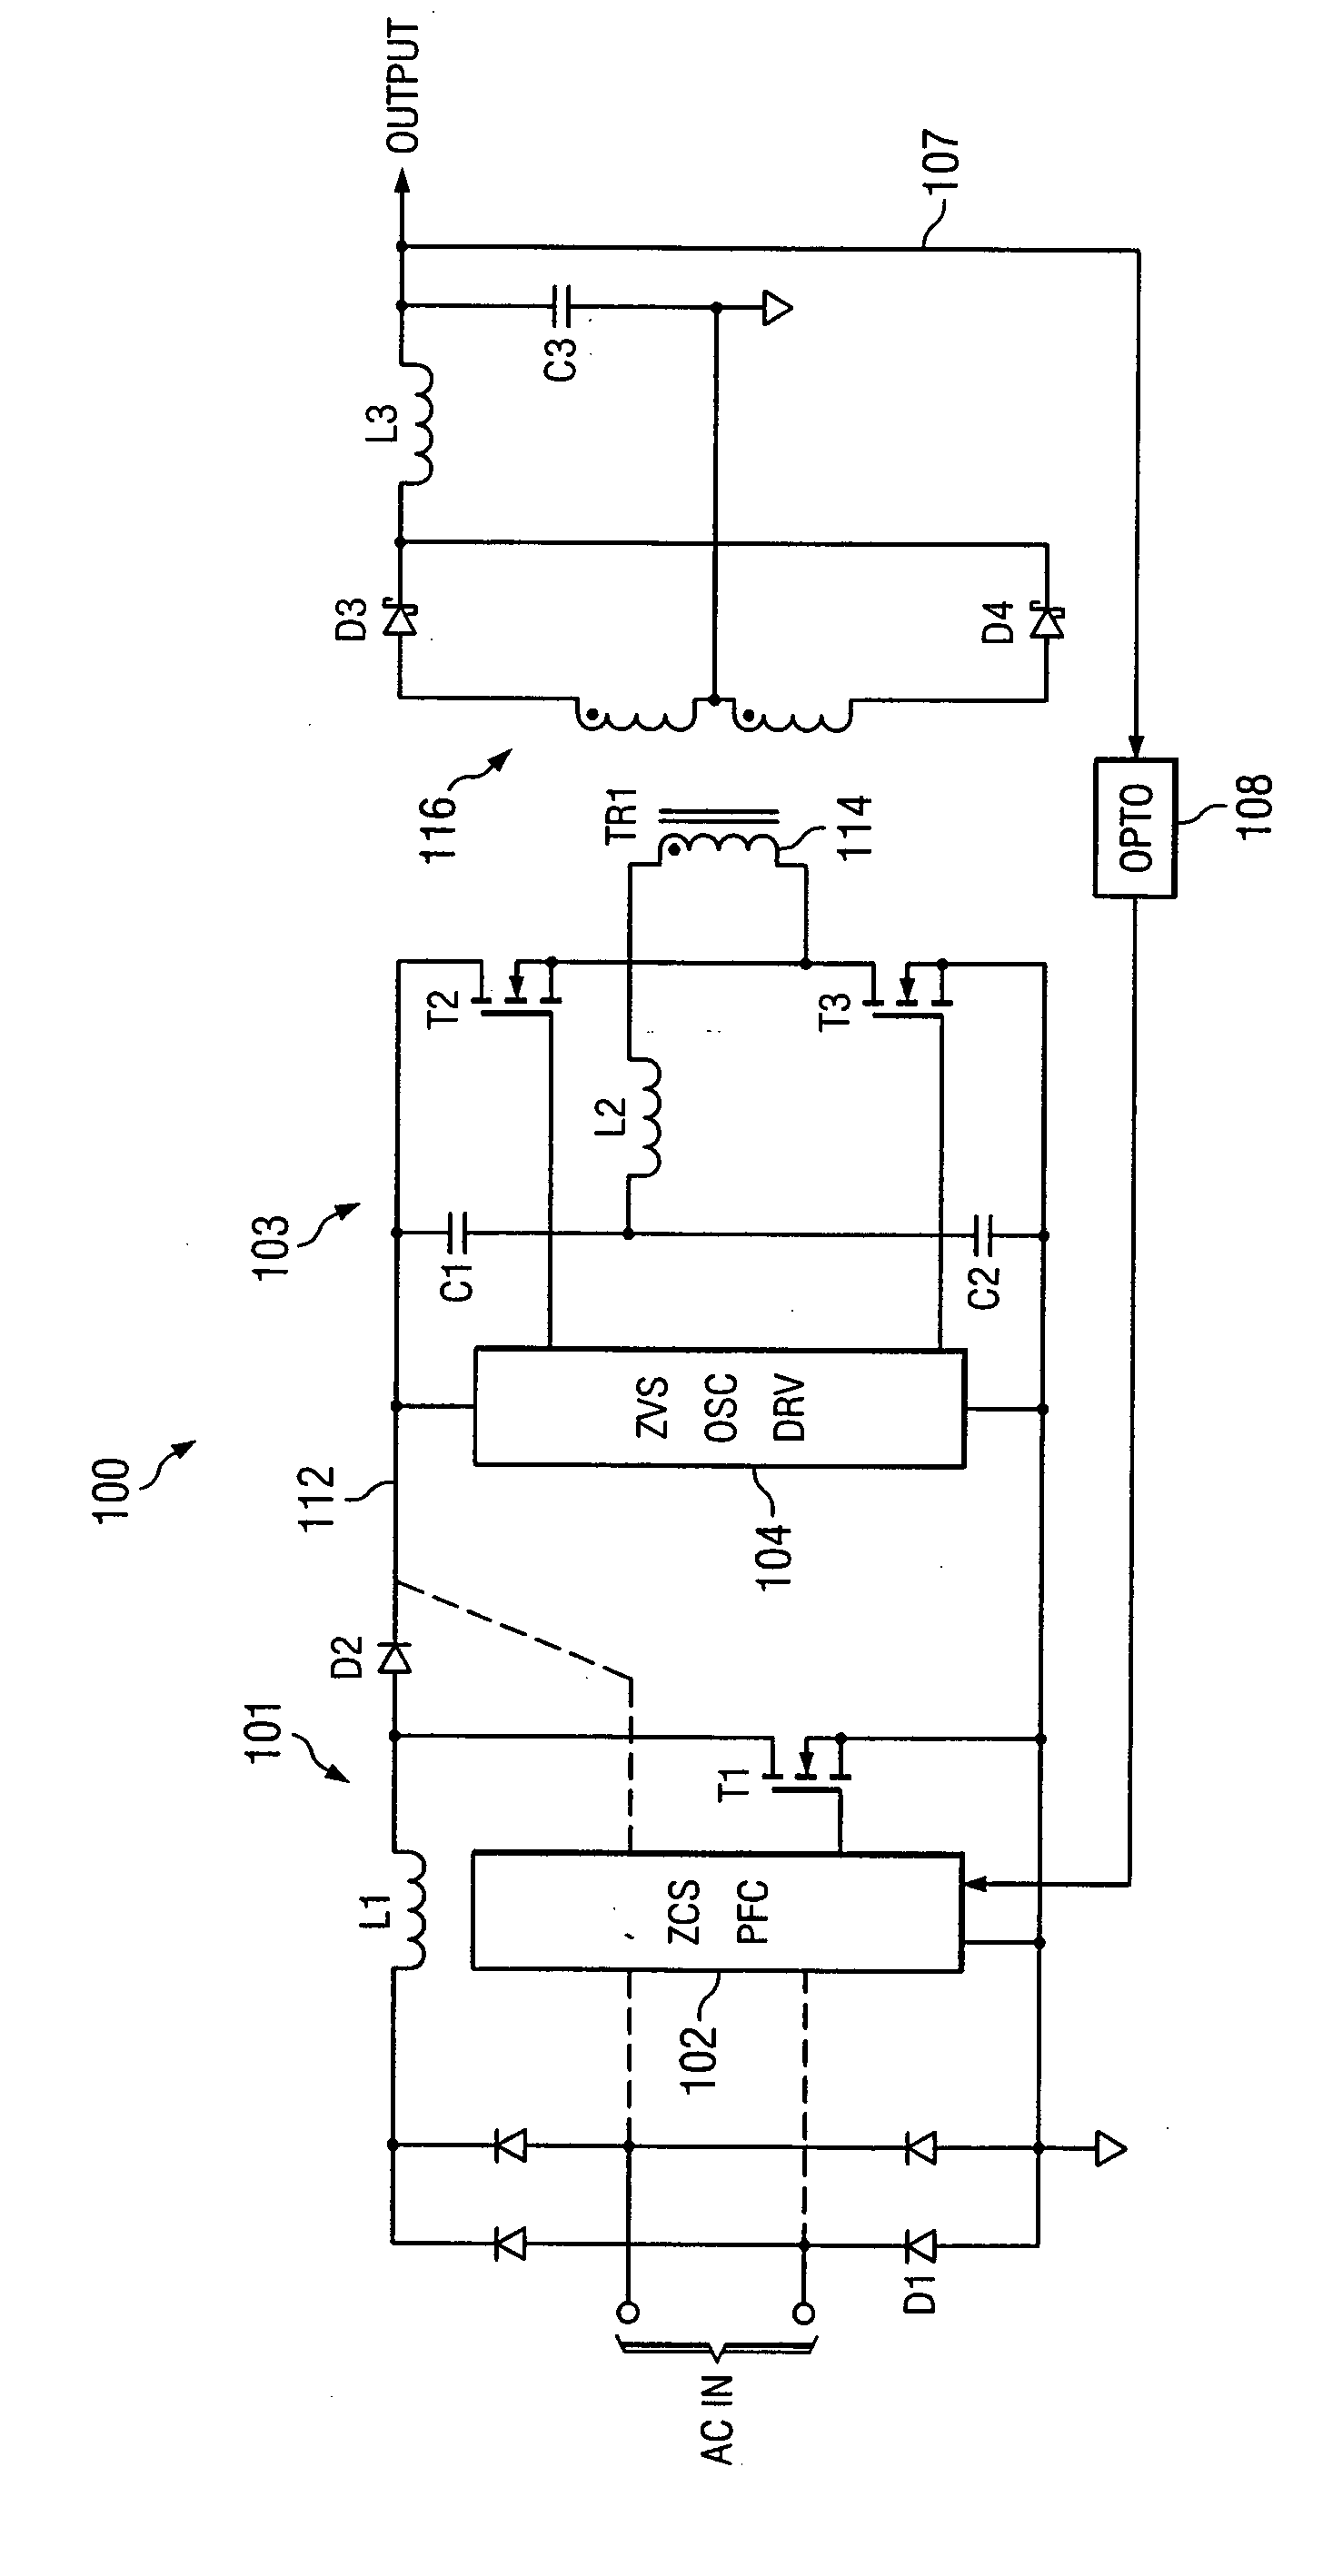 Highly efficient isolated AC/DC power conversion technique